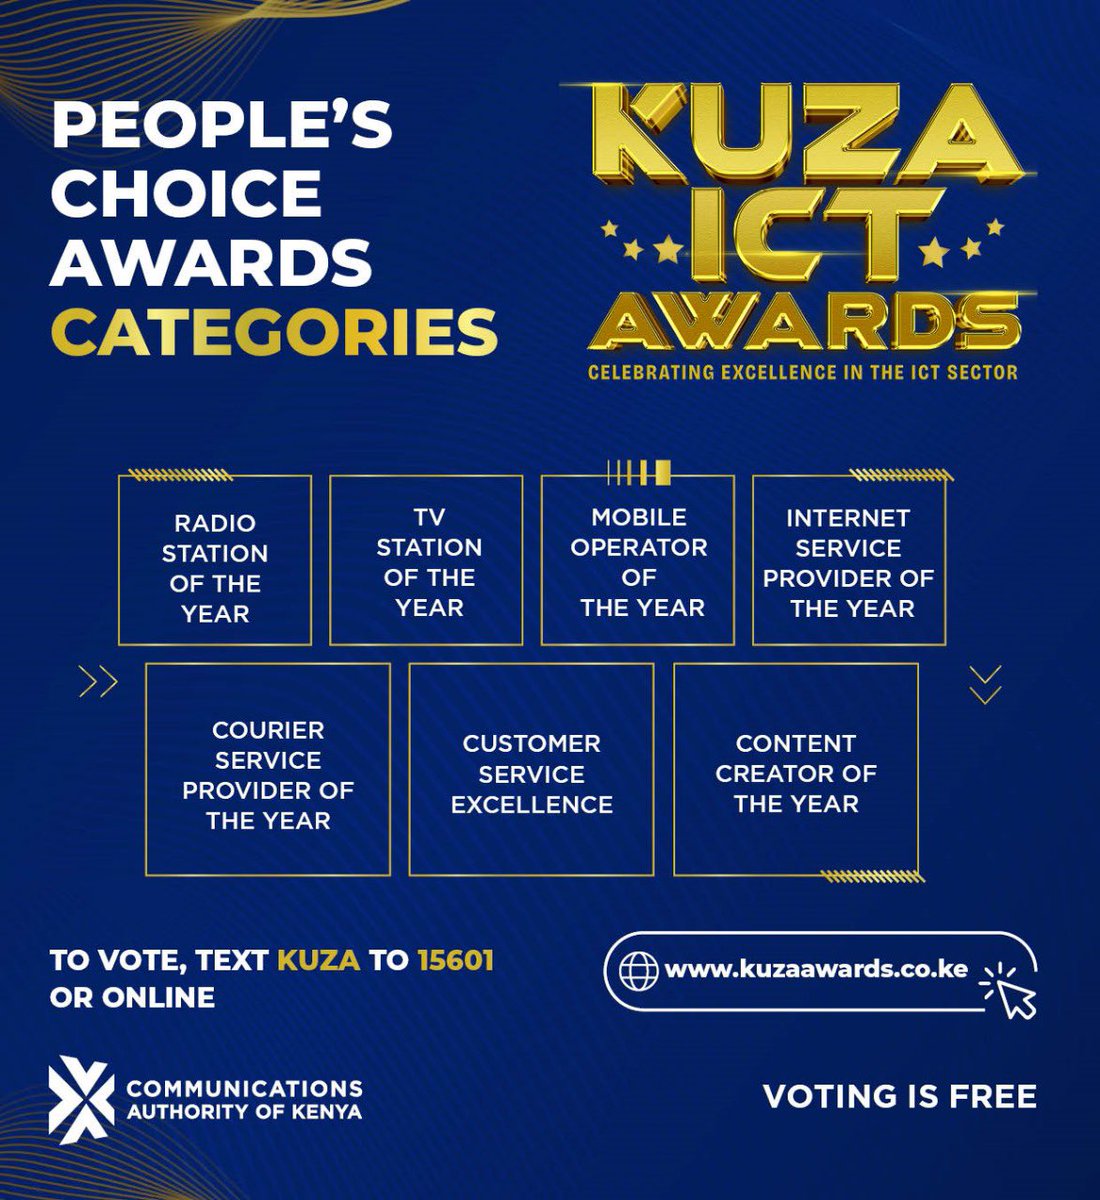 Only few days left to cast your vote in the People's Choice Award category! Have you made your voice heard? This award empowers consumers to express their opinions and preferences. Vote now via SMS short code 15601 or online at kuzaawards.co.ke! #KuzaICTAwards2024